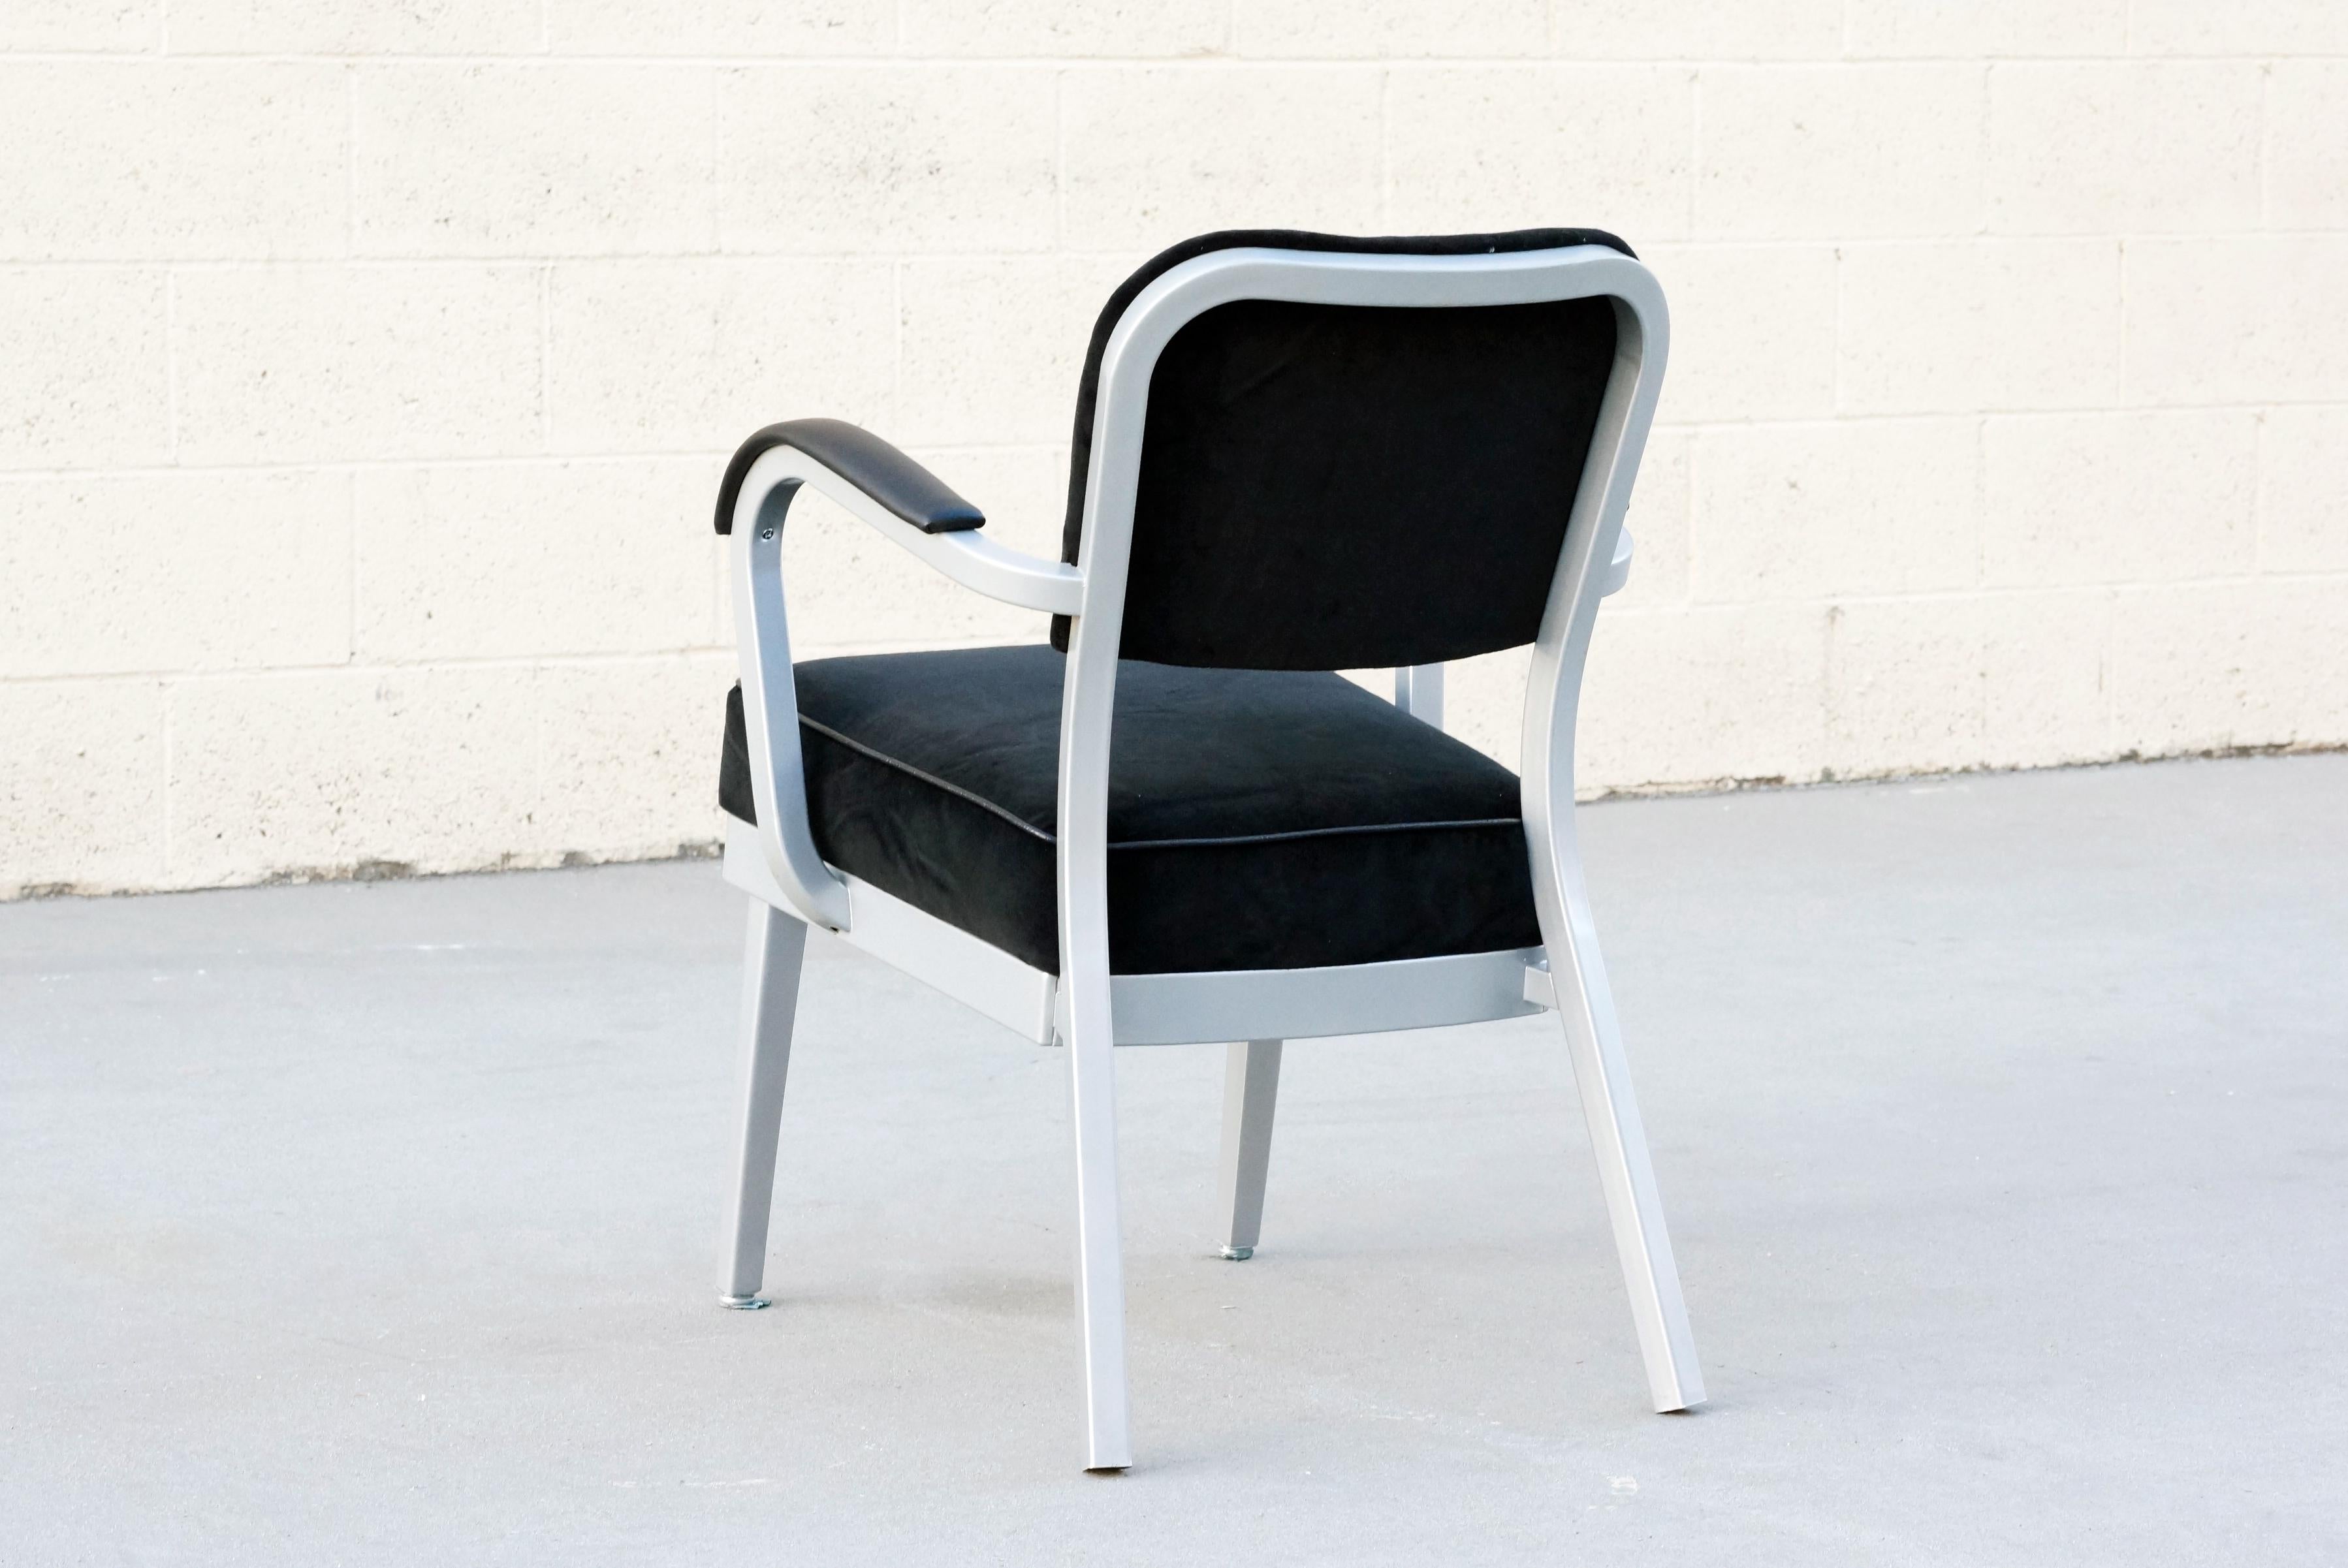 Classic mid century steel tanker armchair refinished in metallic silver powder-coated frame and reupholstered in black velvet with black vinyl armcaps. 

Dimensions: 24